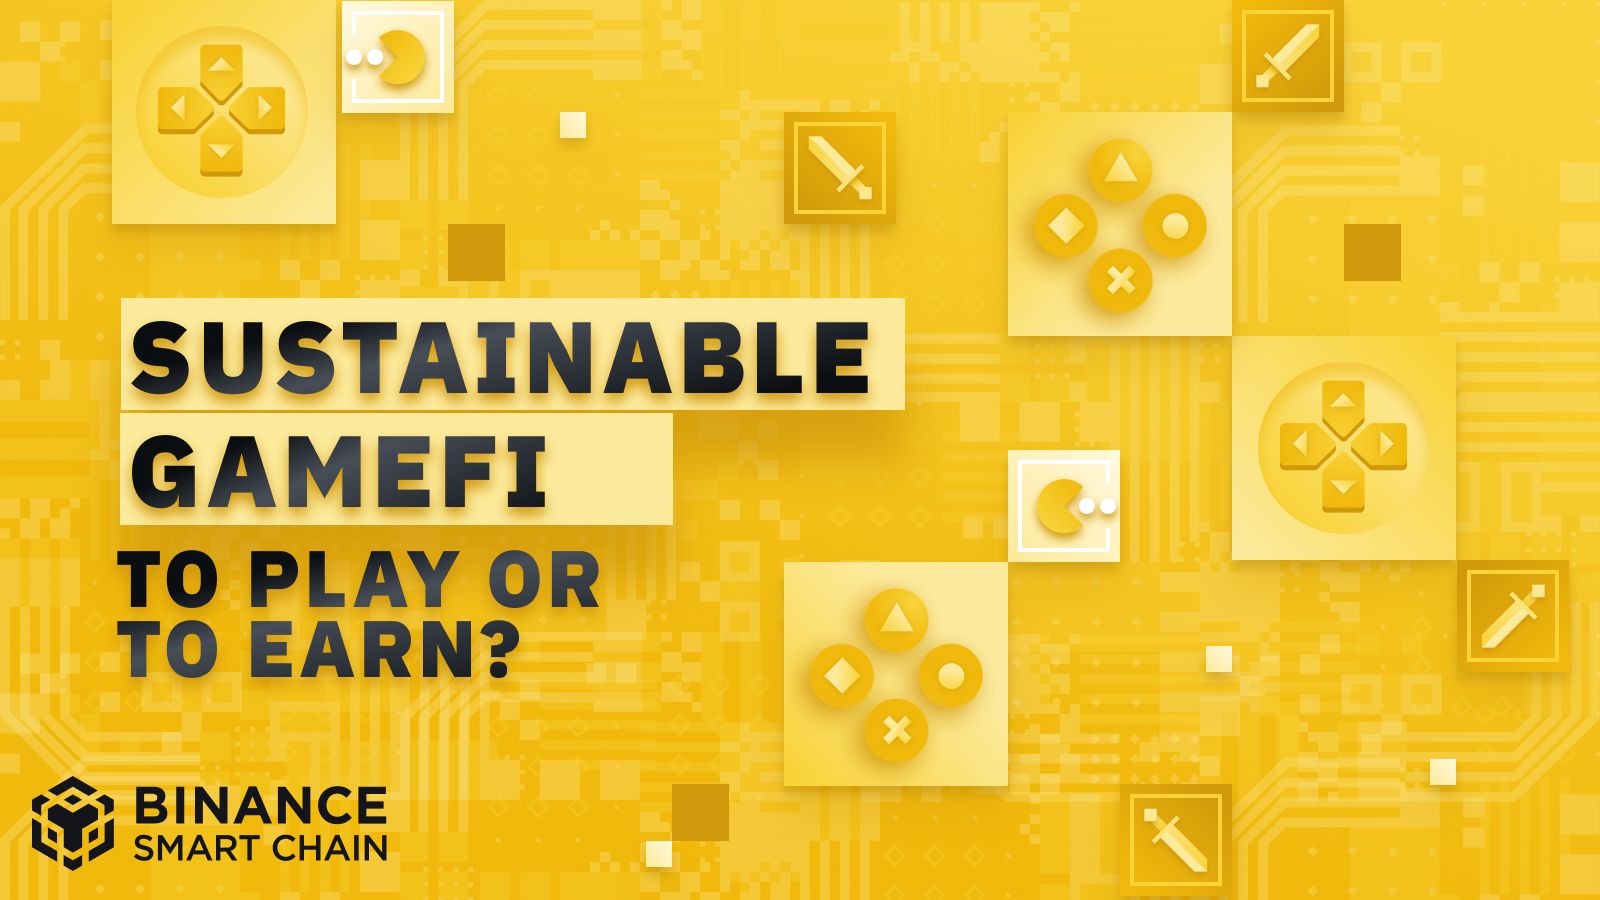 Sustainable GameFi: To Play or To Earn?